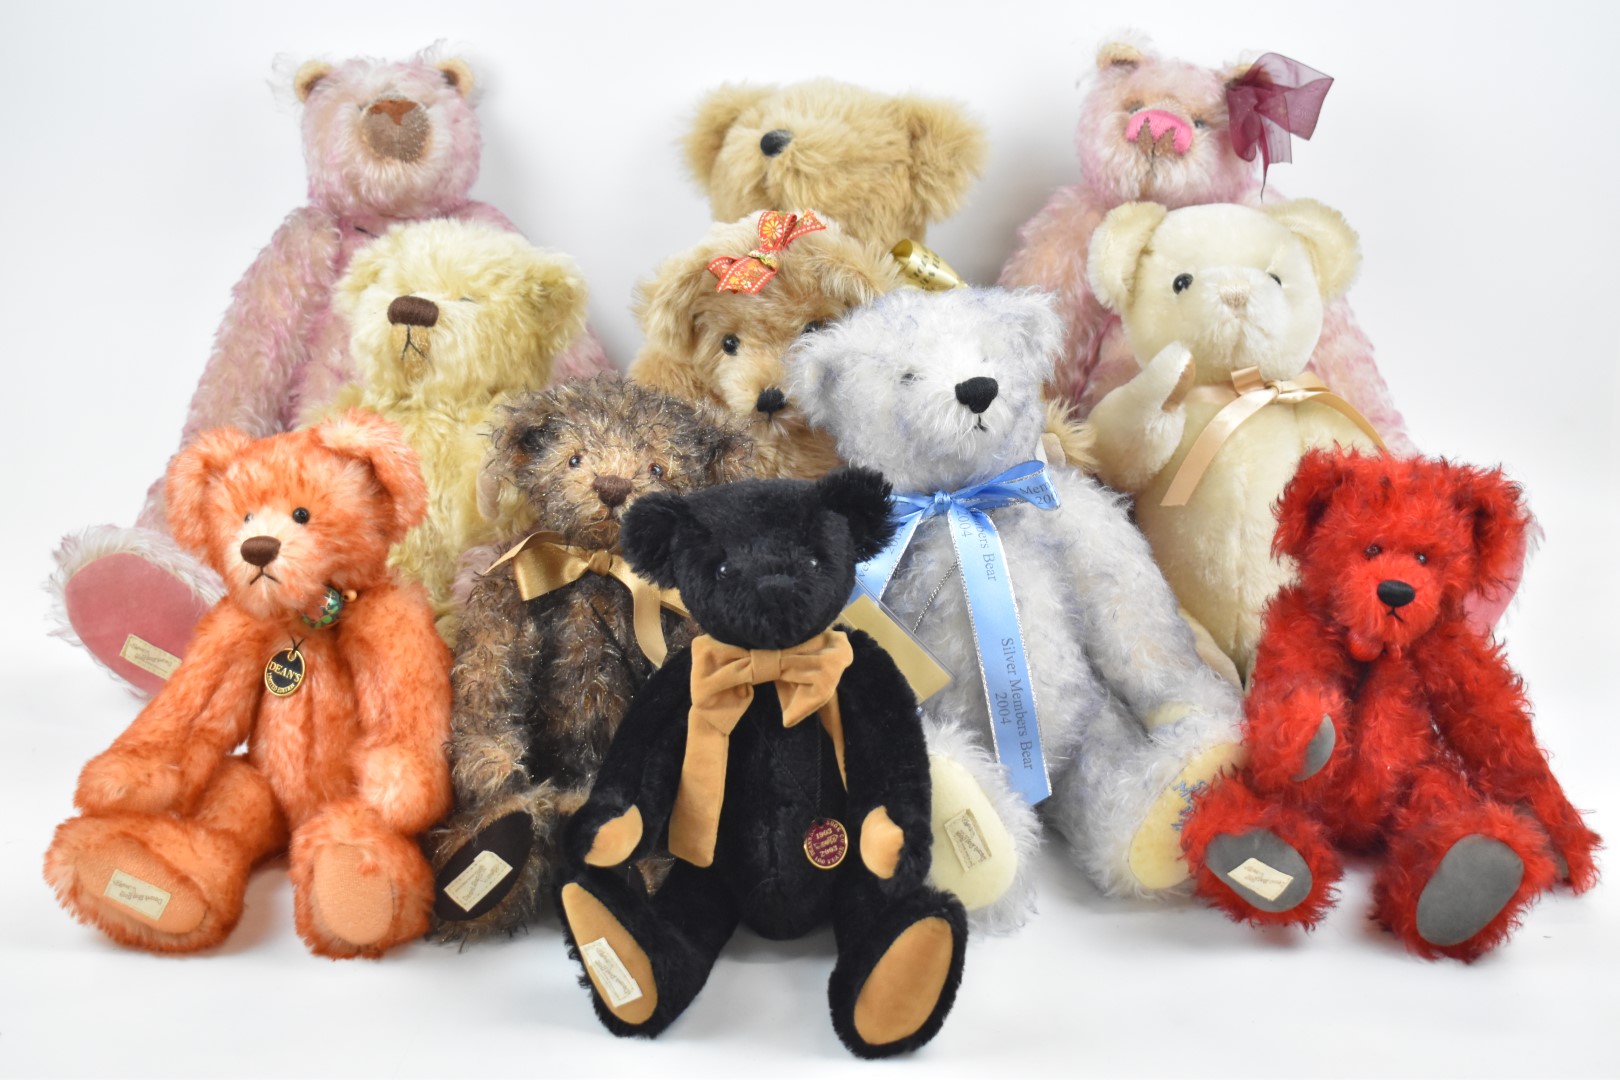 Eleven Deans Rag Book limited edition Teddy bears, most with original labels and tags to include